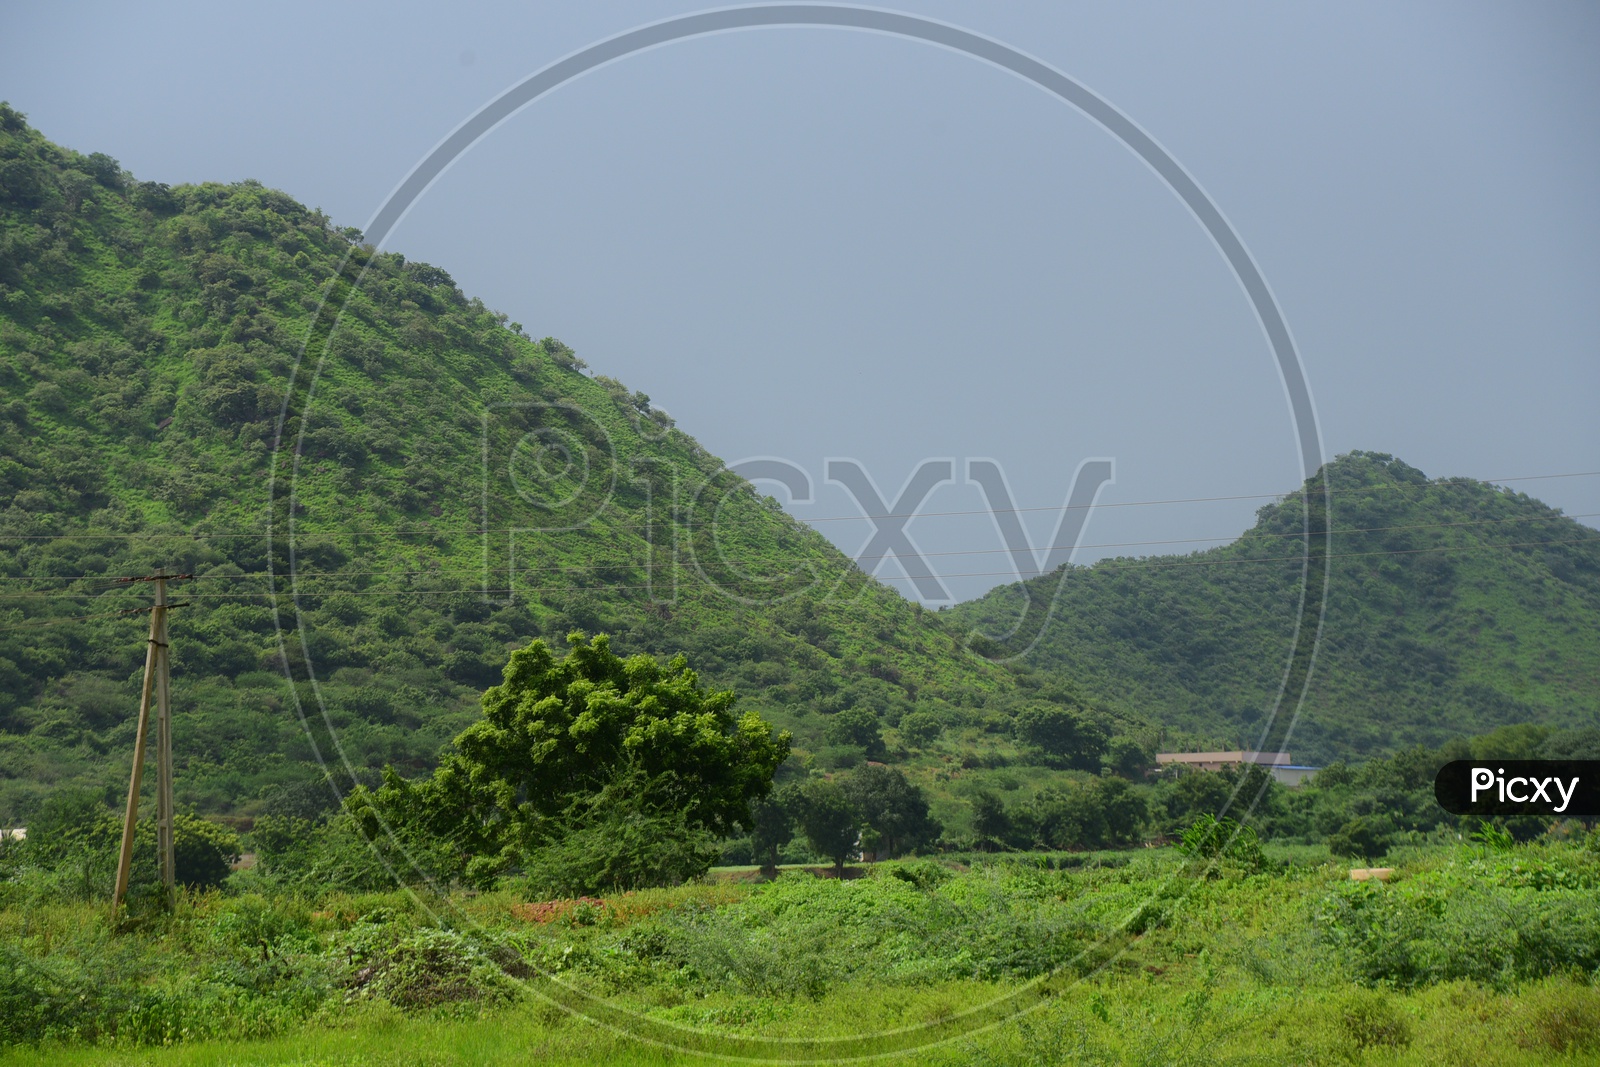 Hills with greenery